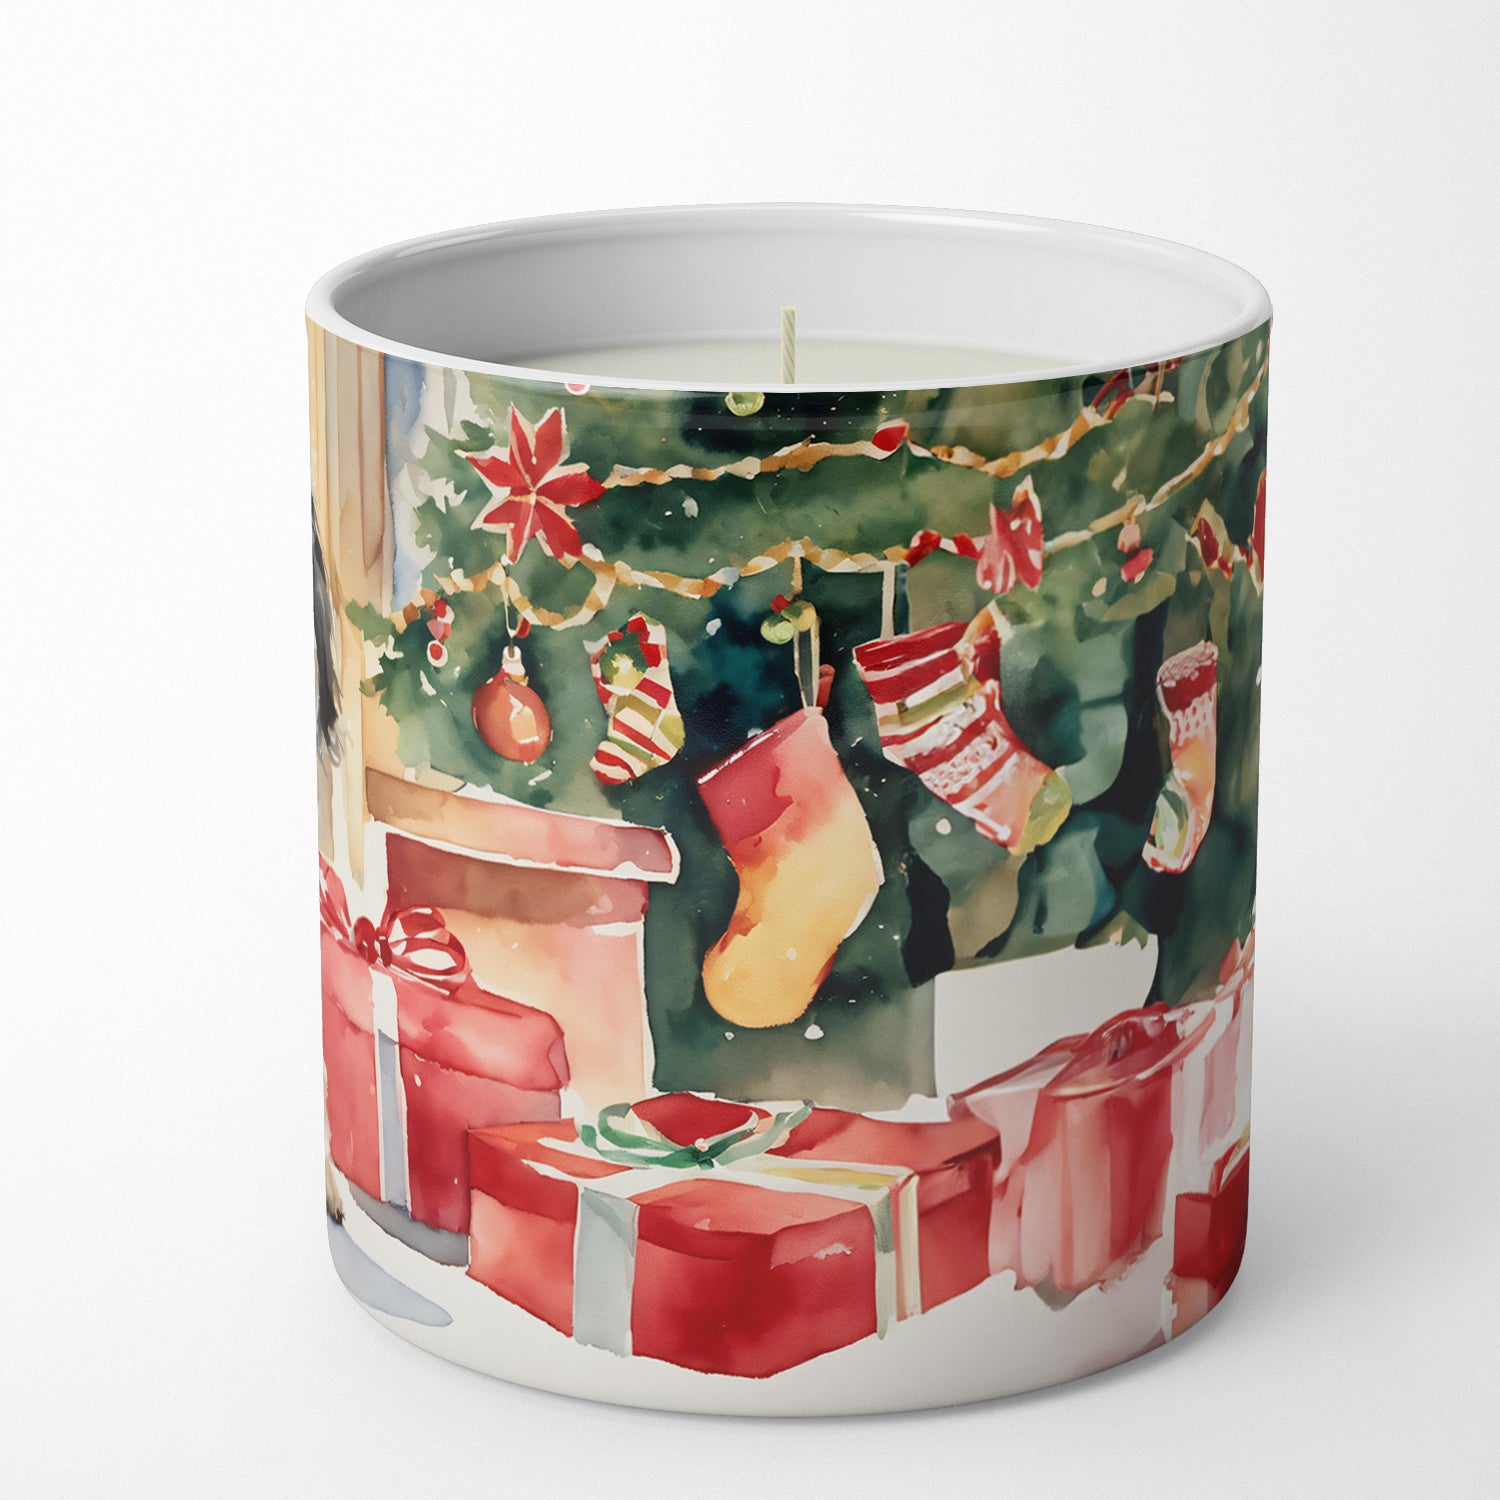 Havanese Cozy Christmas Decorative Soy Candle